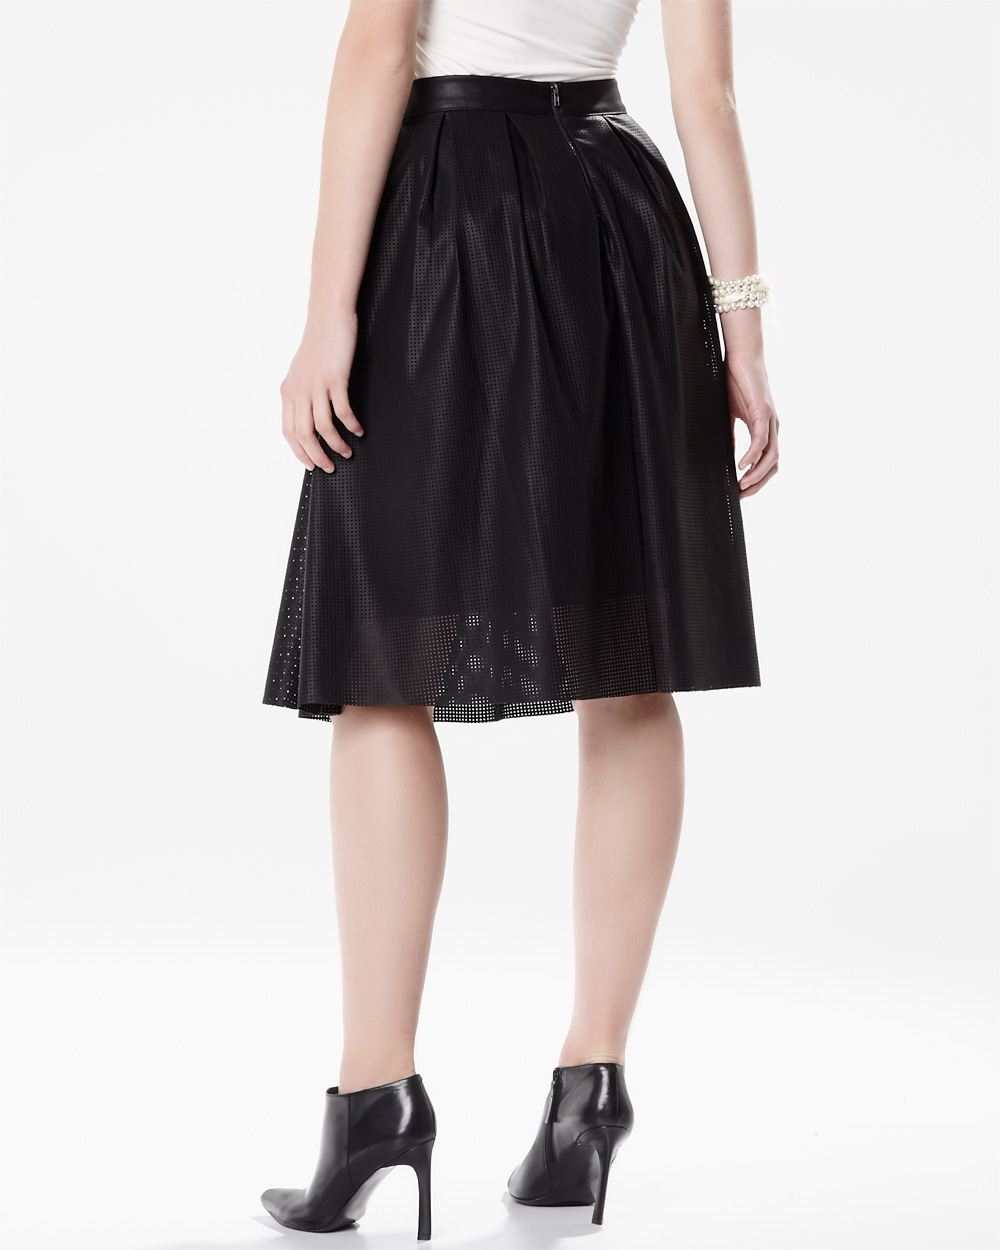 Vegan leather cut-out skirt | RW&CO.